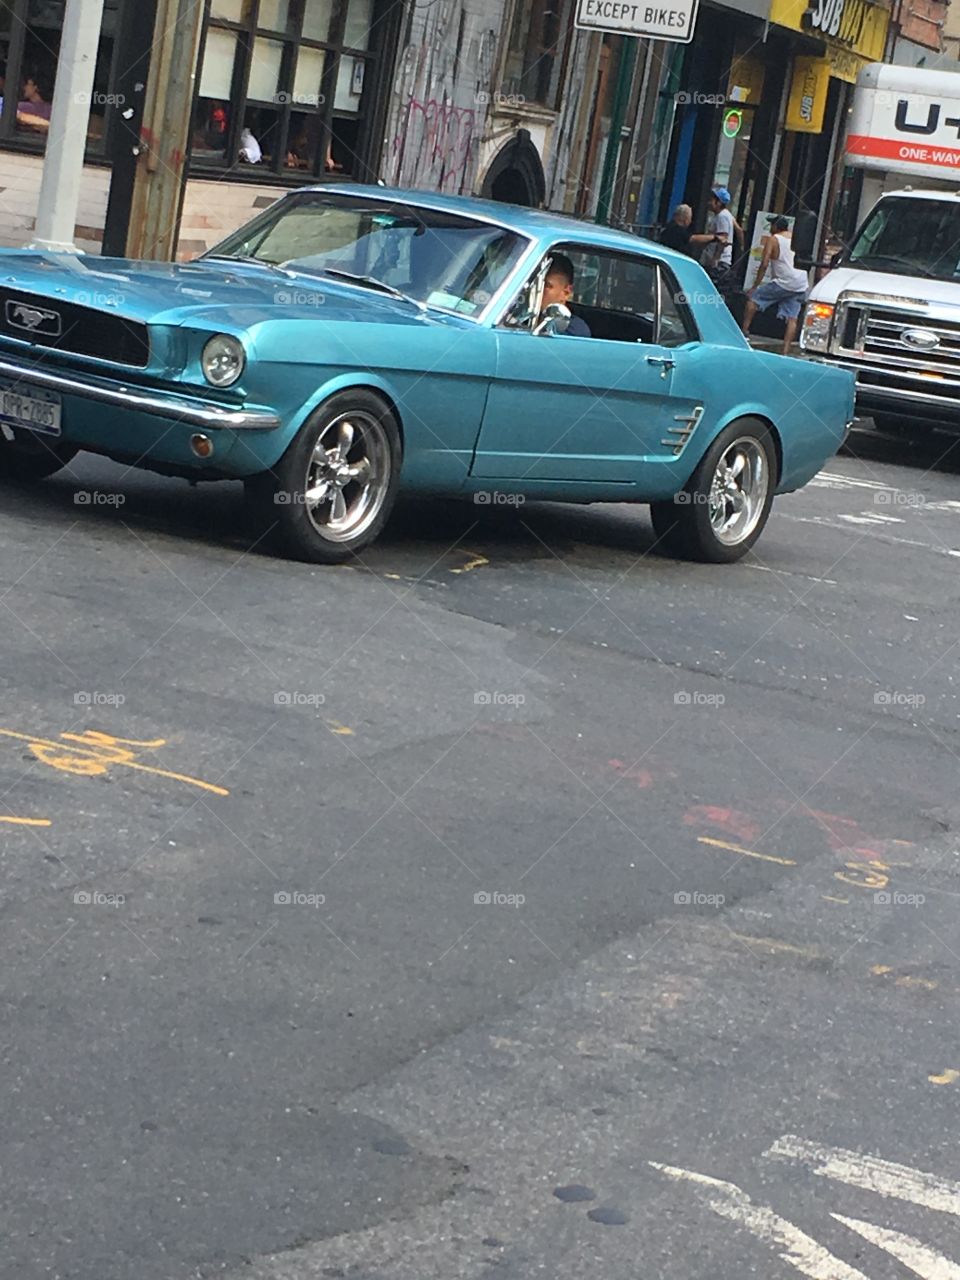 Here we have a classic mustang posed like a good movie action scene. This new york city street makes everything look a little more vintage. Have fun with this photo. 